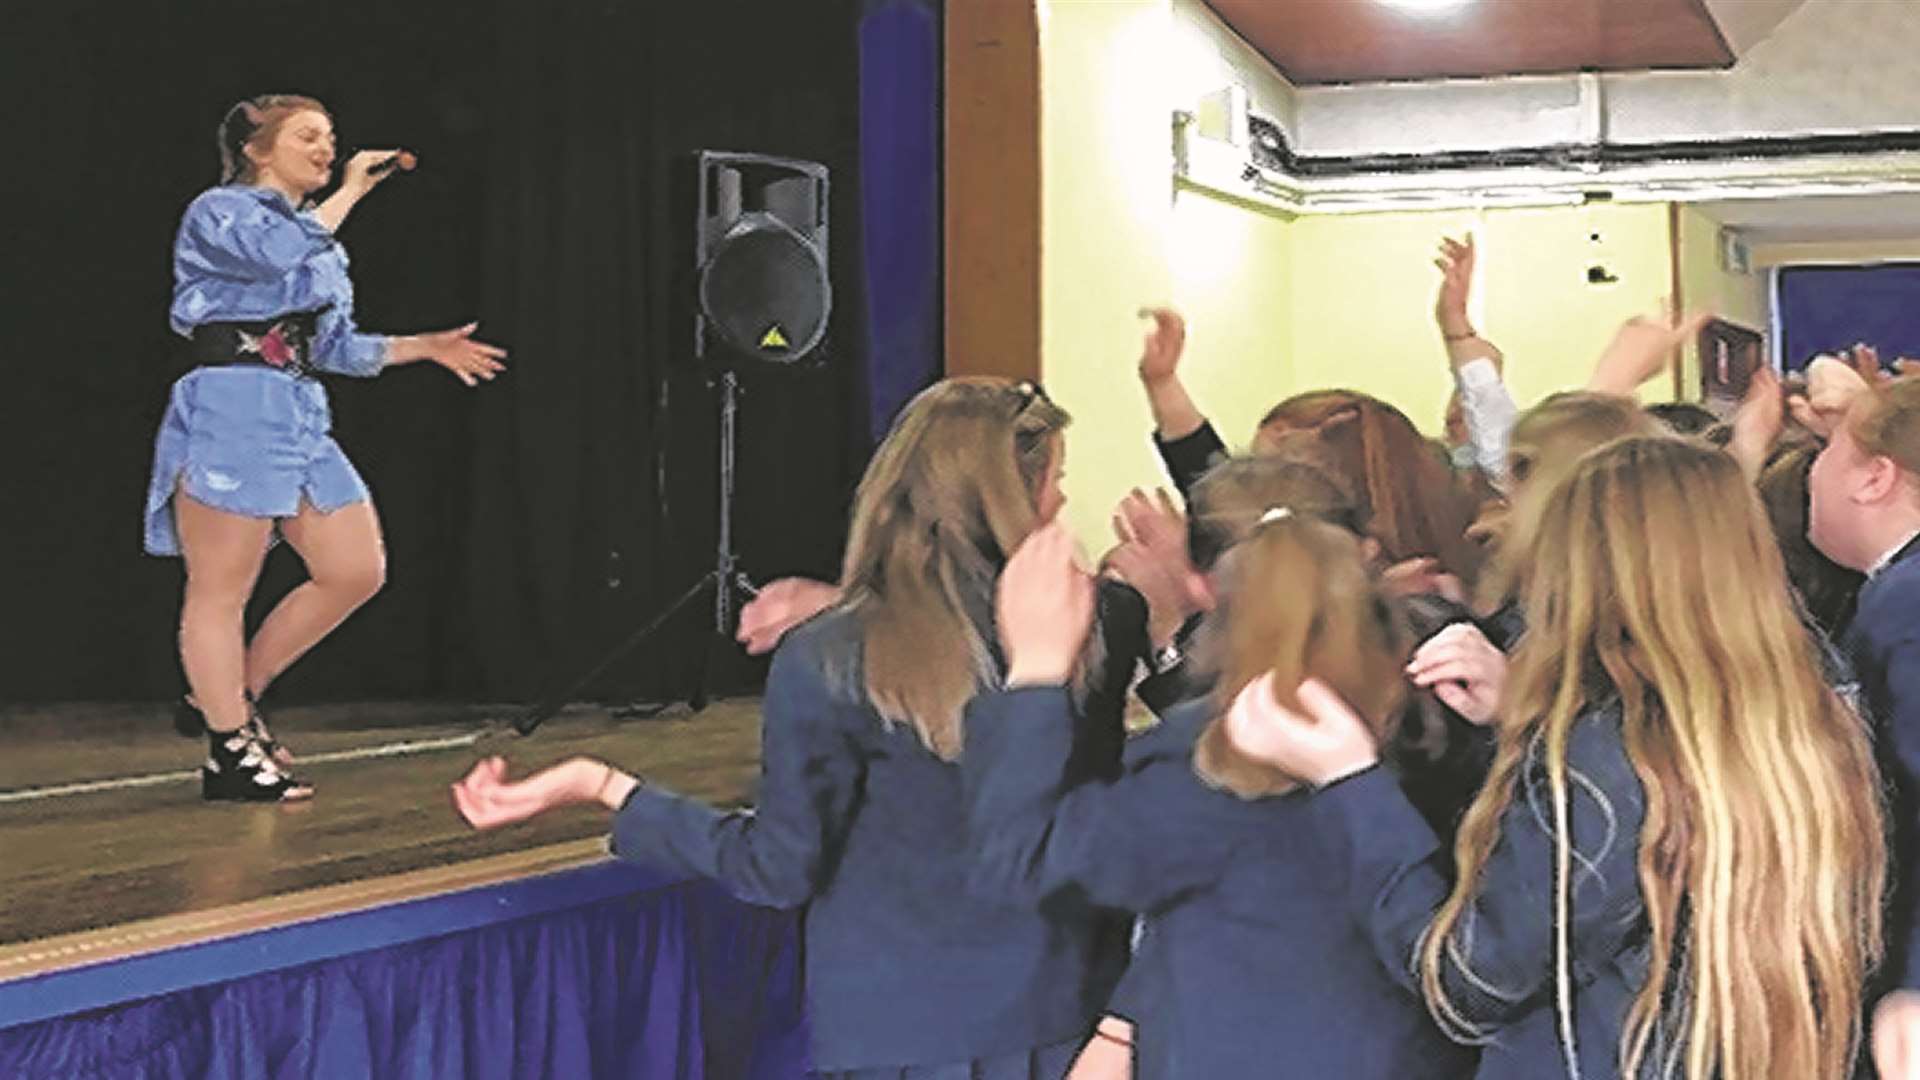 Dover Grammar School for Girls hosting a campaign against cyberbullying